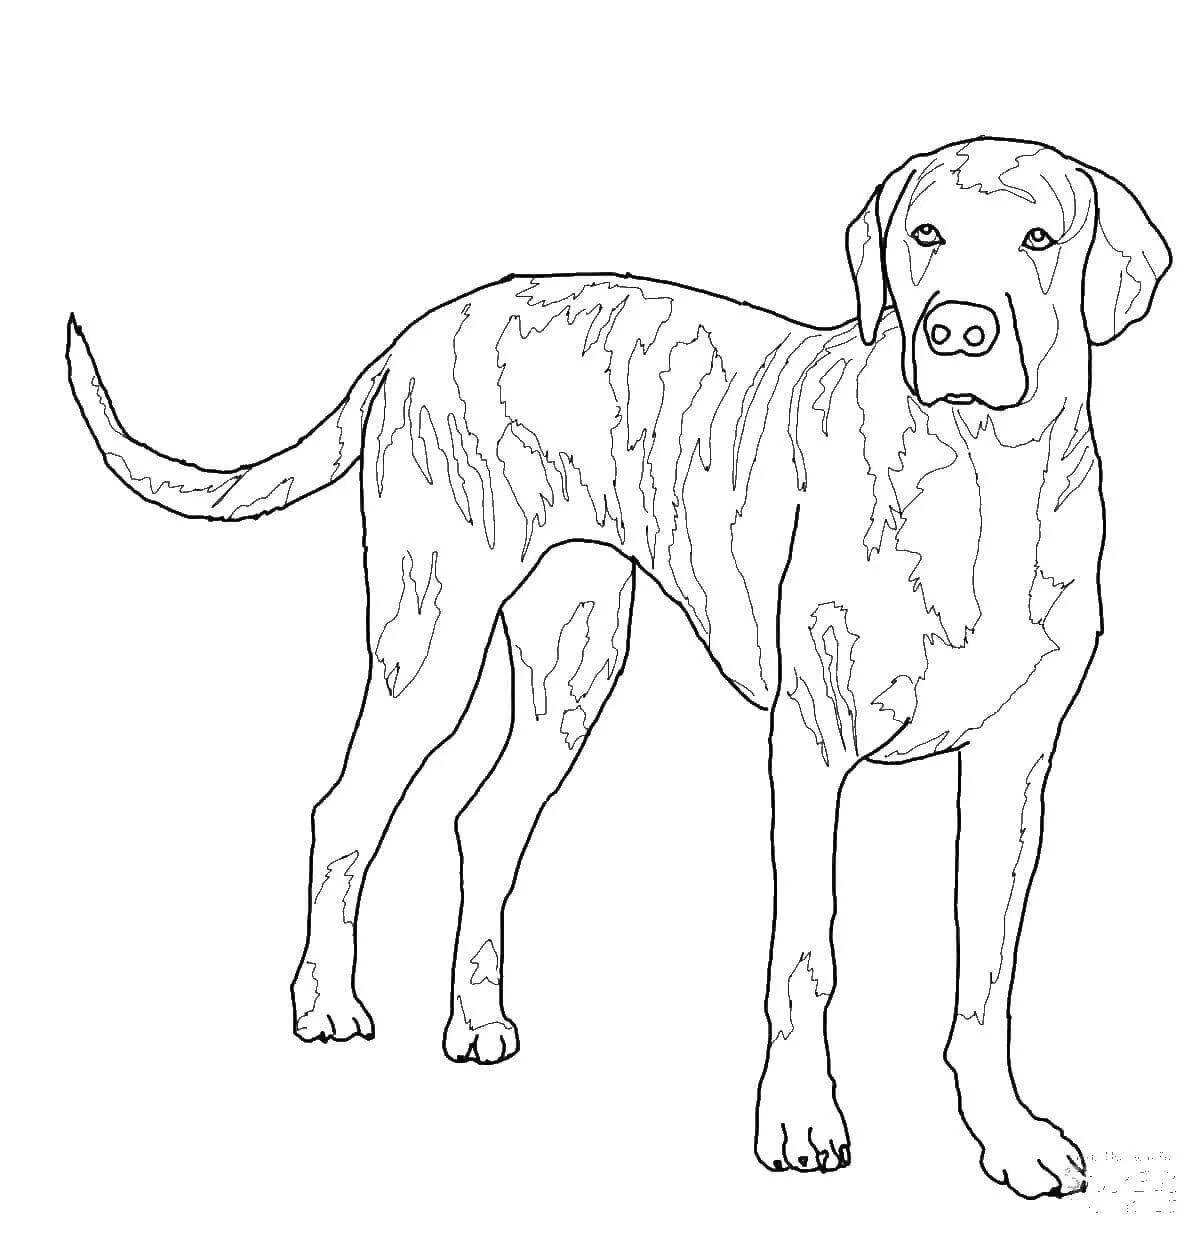 Intelligent coloring pages of dog breeds